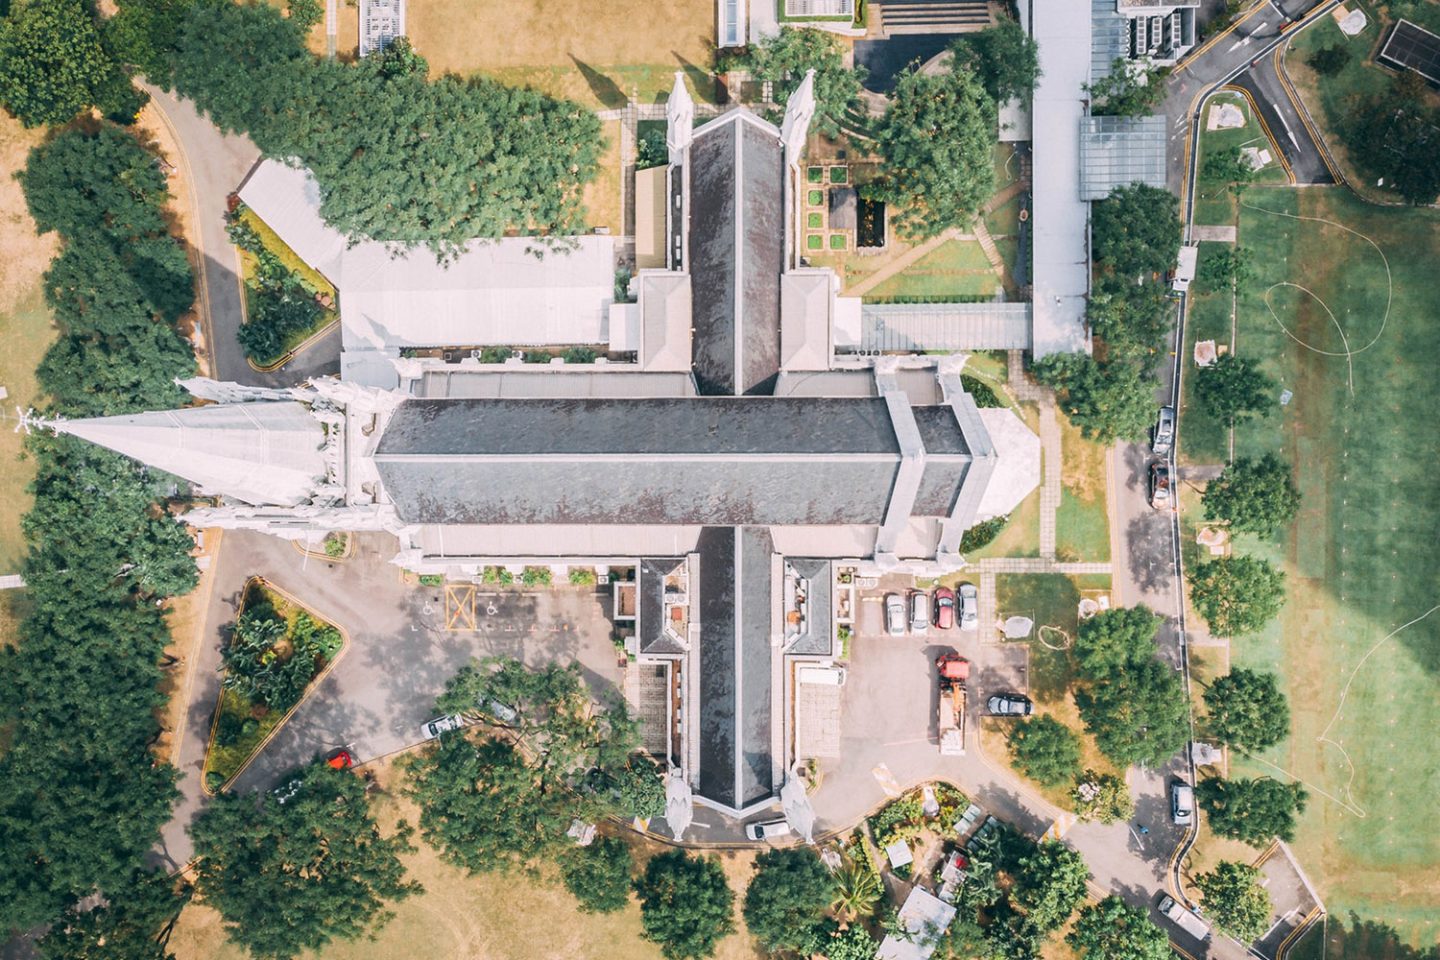 Aerial view of a church in Singapore